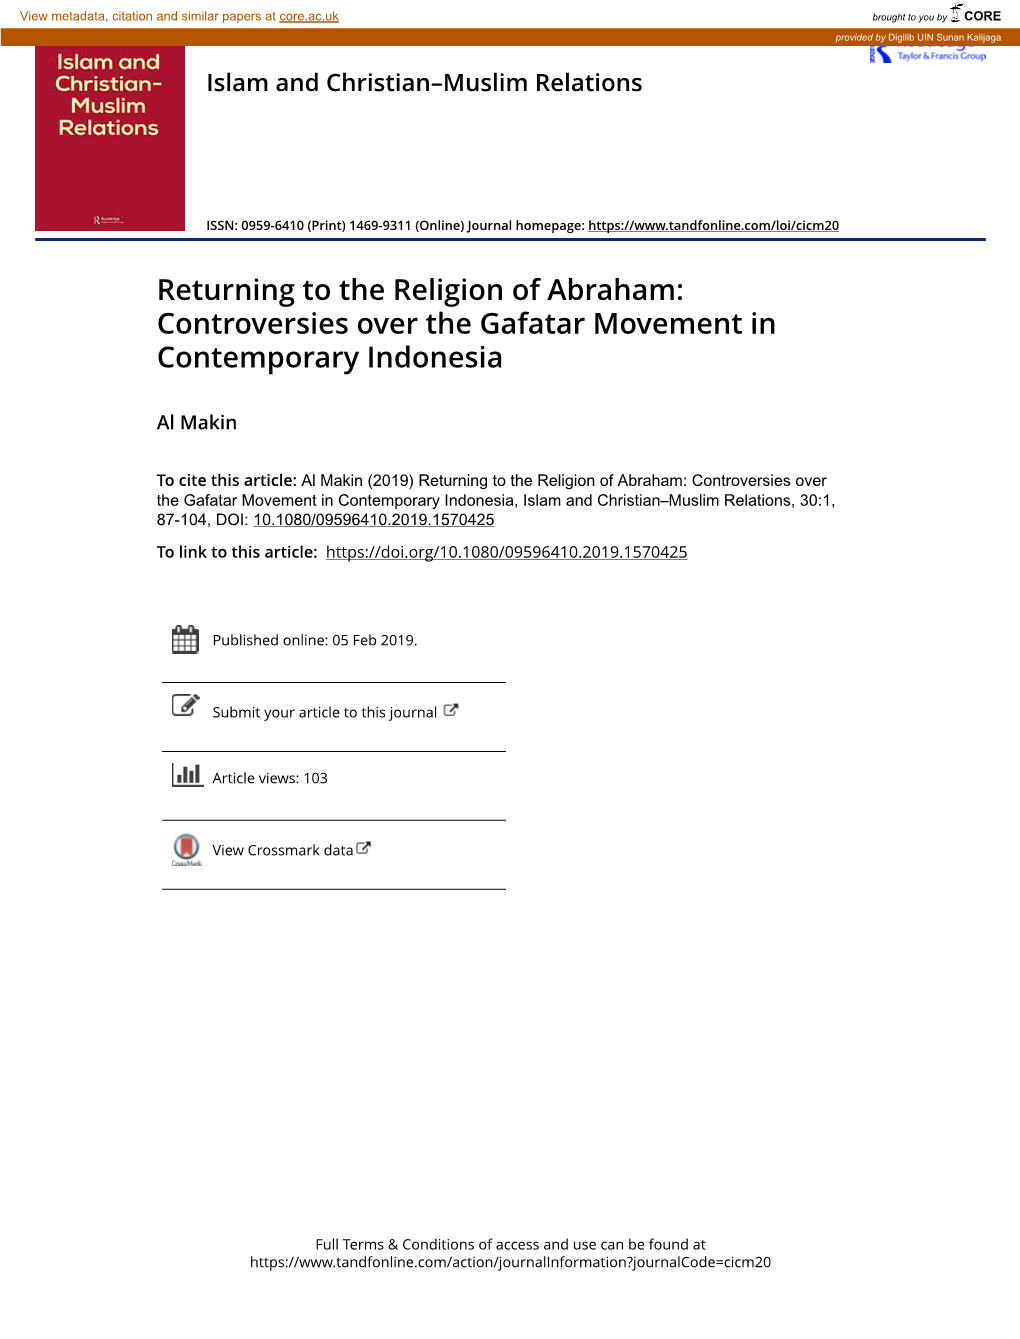 Returning to the Religion of Abraham: Controversies Over the Gafatar Movement in Contemporary Indonesia